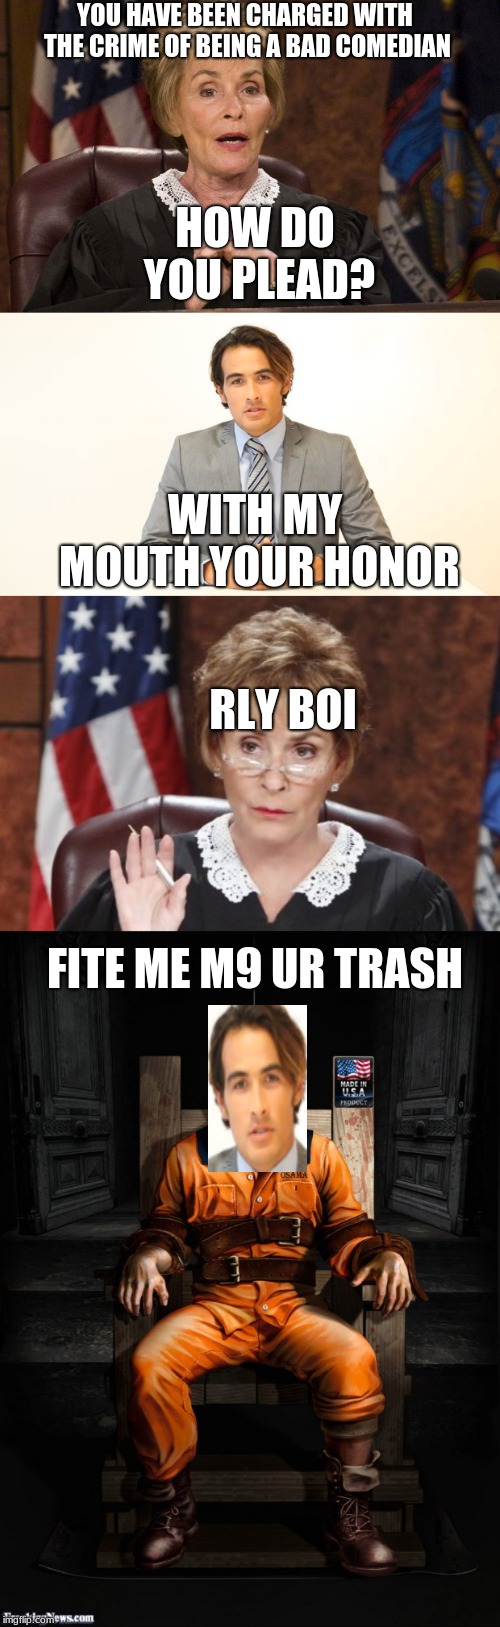 The worst case in human history | HOW DO YOU PLEAD? YOU HAVE BEEN CHARGED WITH THE CRIME OF BEING A BAD COMEDIAN; WITH MY MOUTH YOUR HONOR; RLY BOI; FITE ME M9 UR TRASH | image tagged in judge judy,trial,courtroom,electric chair | made w/ Imgflip meme maker